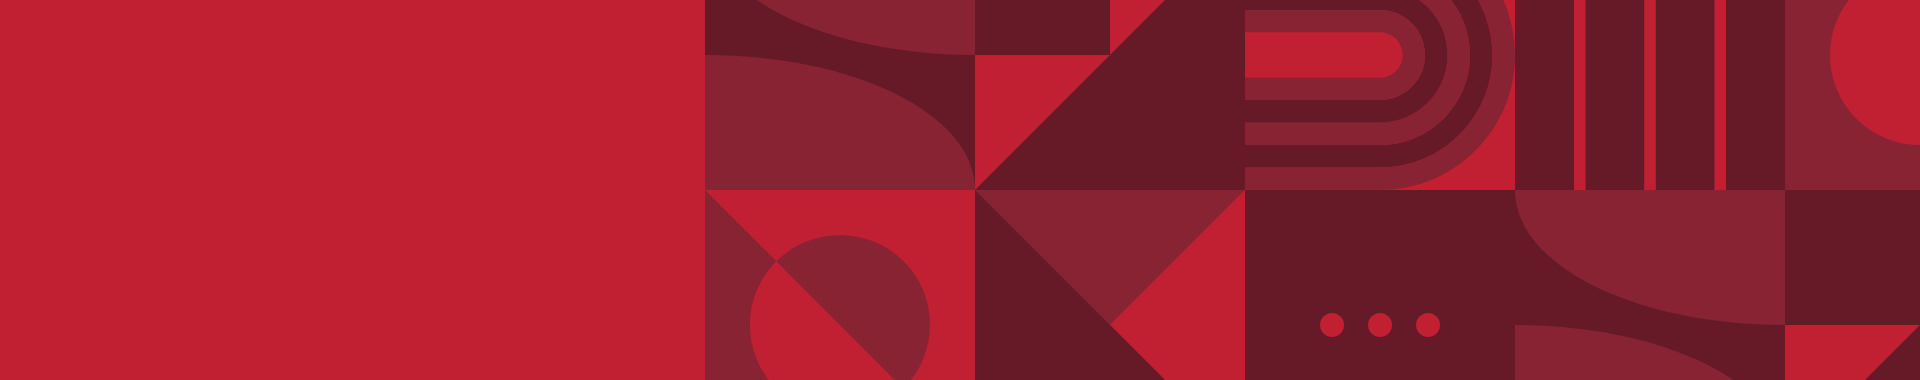 A red patchwork of abstract shapes